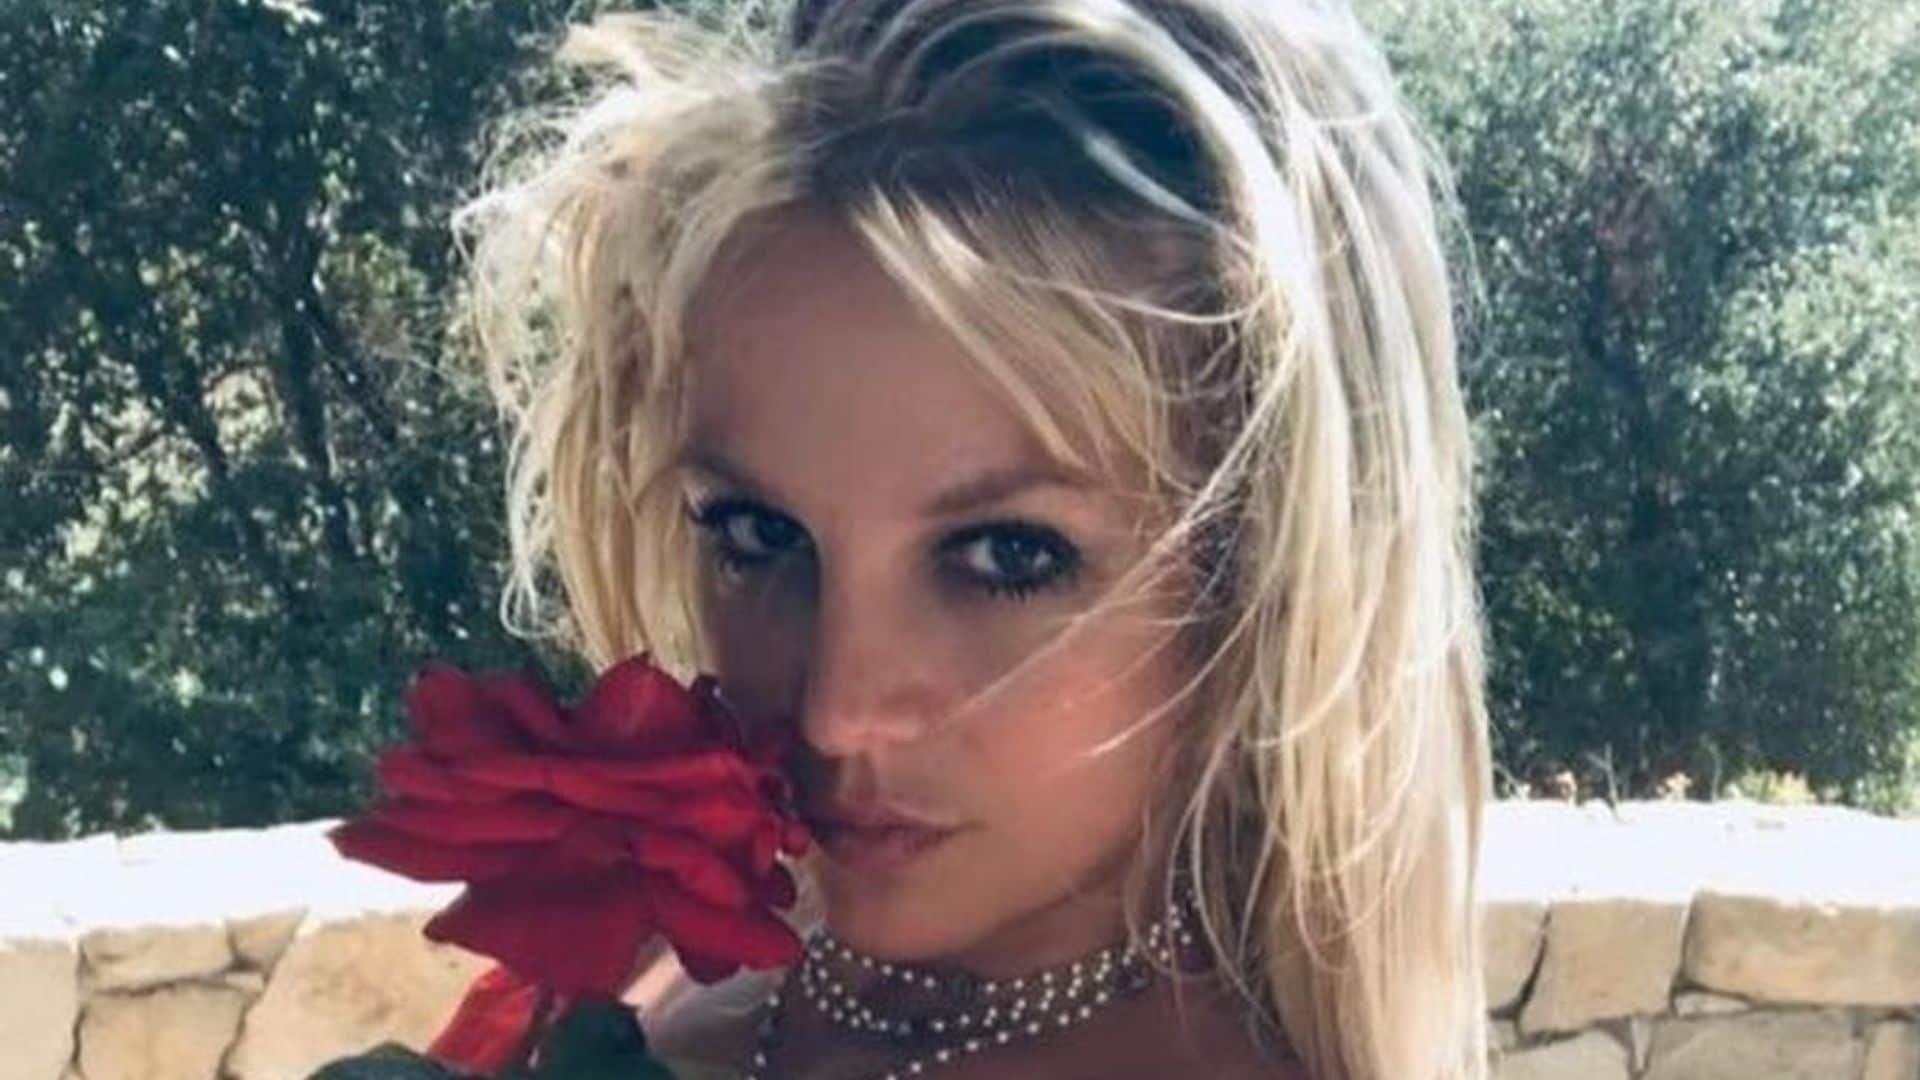 Those close to Britney Spears were reportedly planning an intervention